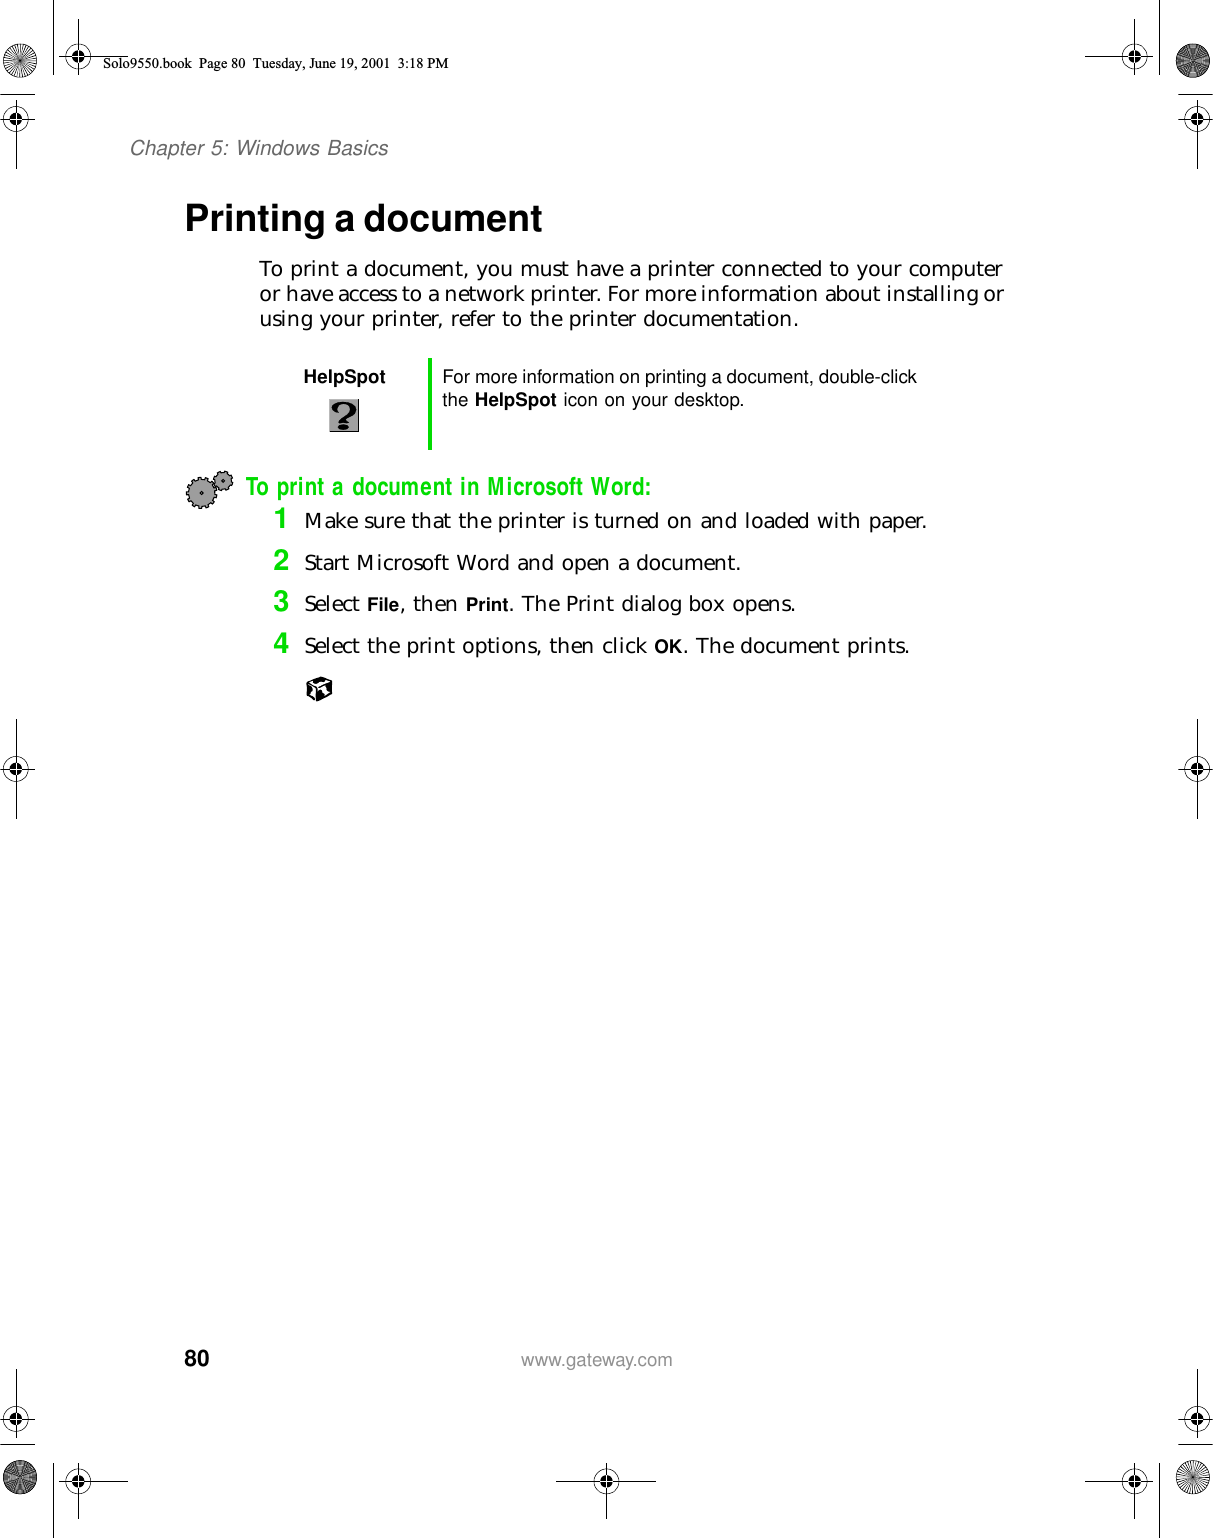 80Chapter 5: Windows Basicswww.gateway.comPrinting a documentTo print a document, you must have a printer connected to your computer or have access to a network printer. For more information about installing or using your printer, refer to the printer documentation.To print a document in Microsoft Word:1Make sure that the printer is turned on and loaded with paper.2Start Microsoft Word and open a document.3Select File, then Print. The Print dialog box opens.4Select the print options, then click OK. The document prints.HelpSpot For more information on printing a document, double-click the HelpSpot icon on your desktop.Solo9550.book Page 80 Tuesday, June 19, 2001 3:18 PM